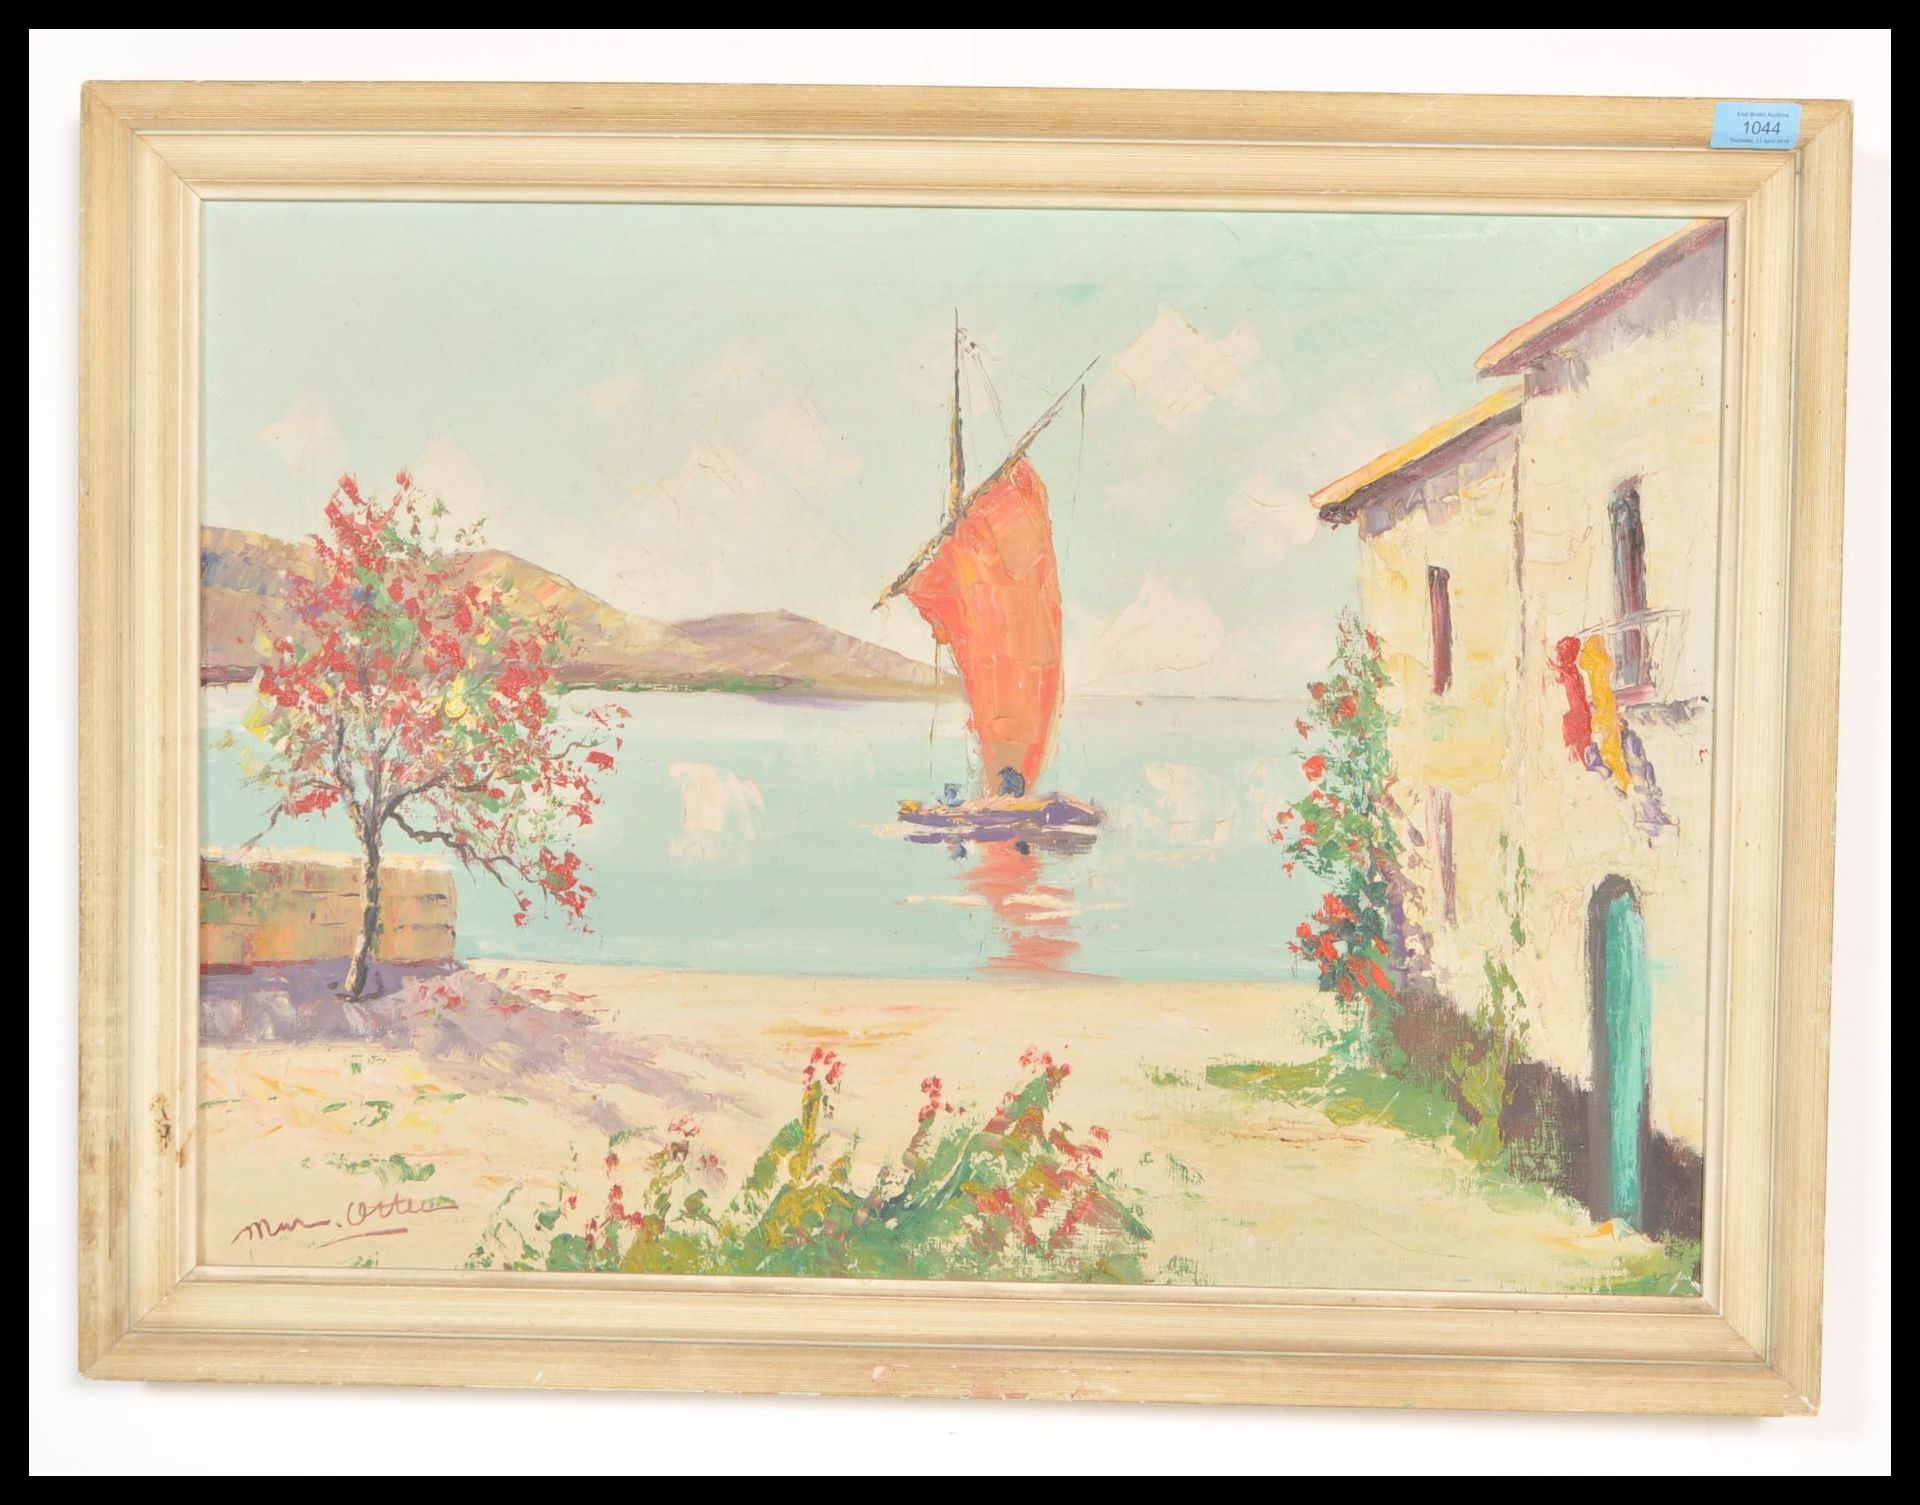 A 20th Century oil painting on canvas depicting a mediterranean scene of a boat sailing in front